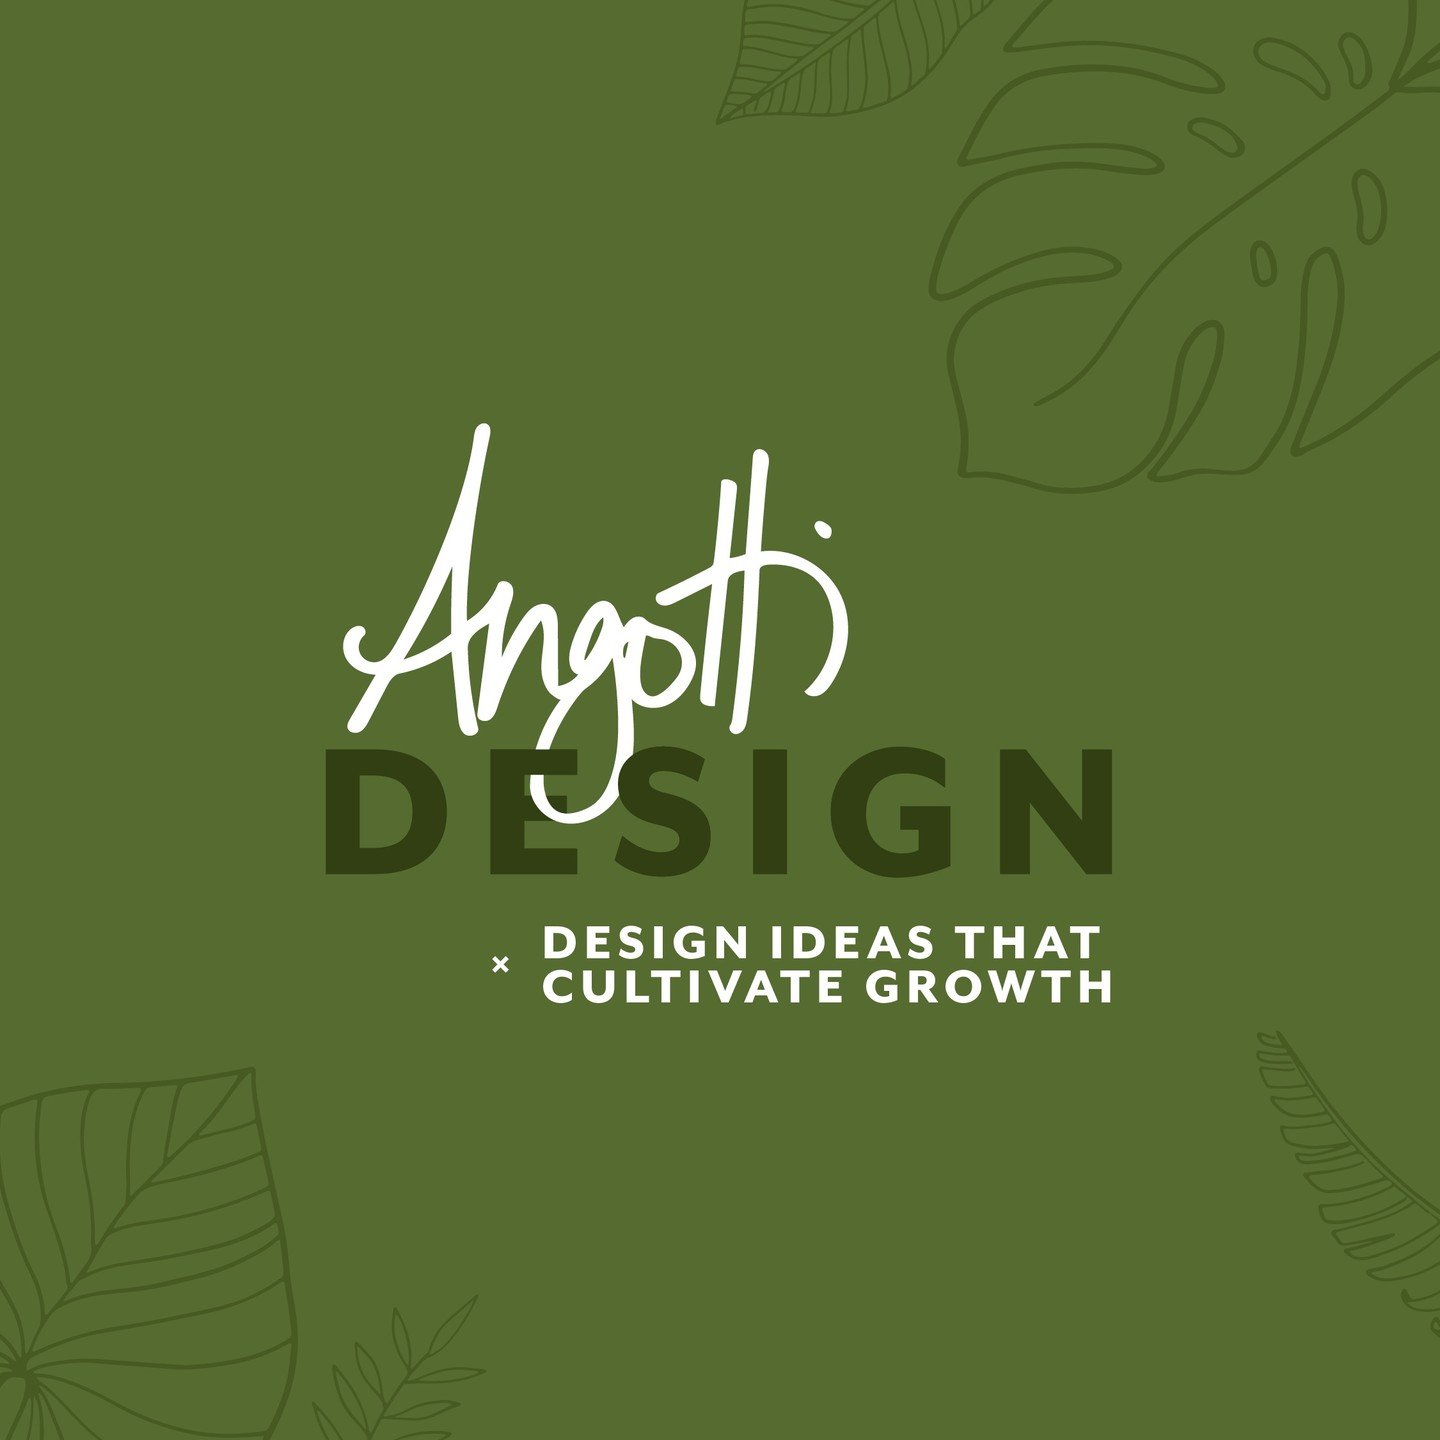 Even a design studio needs a brand refresh every couple of years! ✨

At Angotti Design, we believe in growth&mdash;both for your business and for ours! 🌱 That's why we're thrilled to announce that we're sprouting into a fresh new look with a brand r